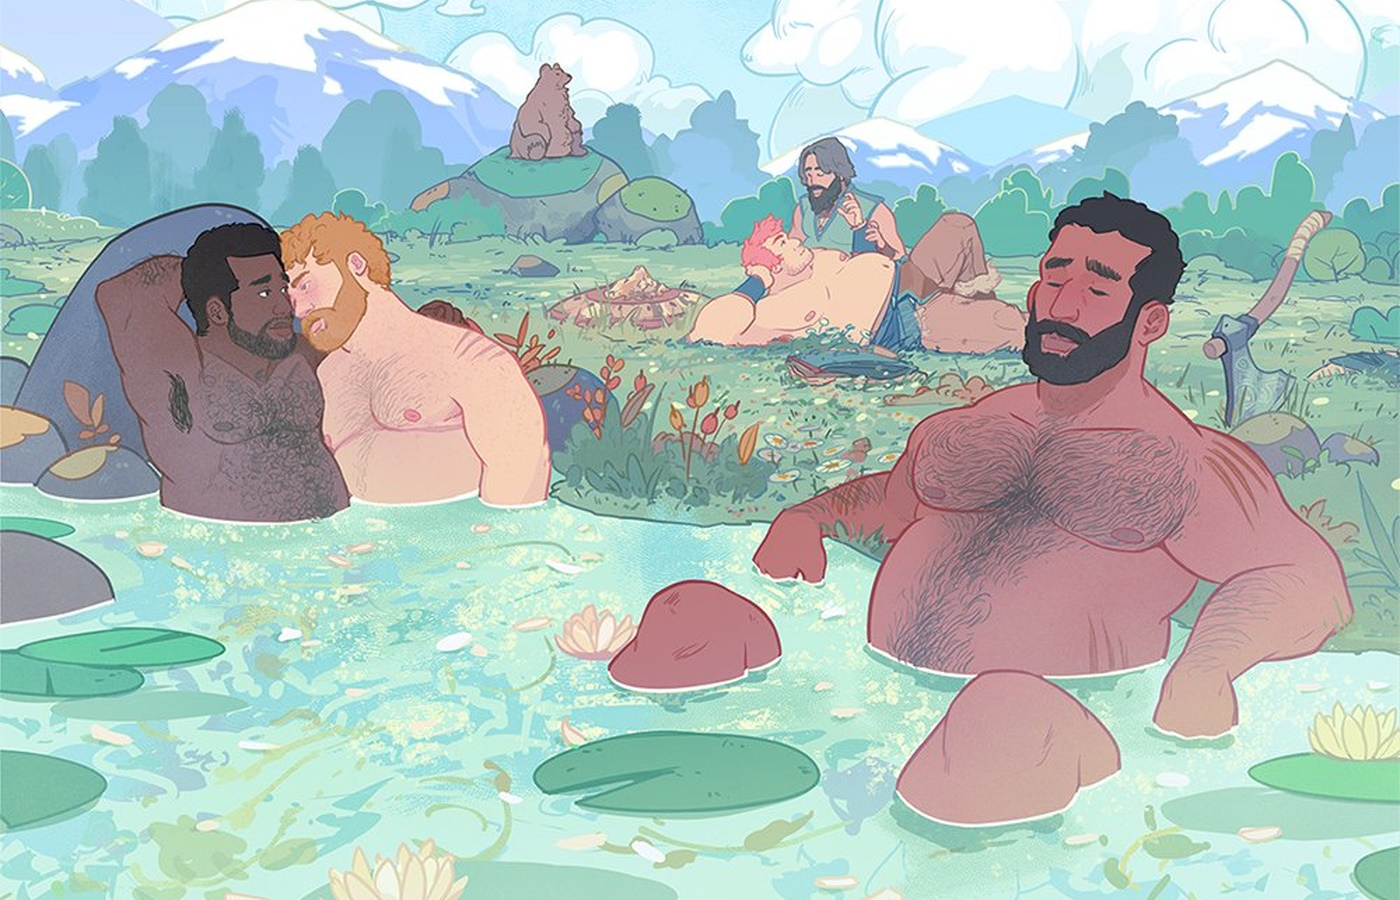 Big men lounge in a natural hot spring, some of them cuddling. Art from Bearscape by Ricardo Bessa